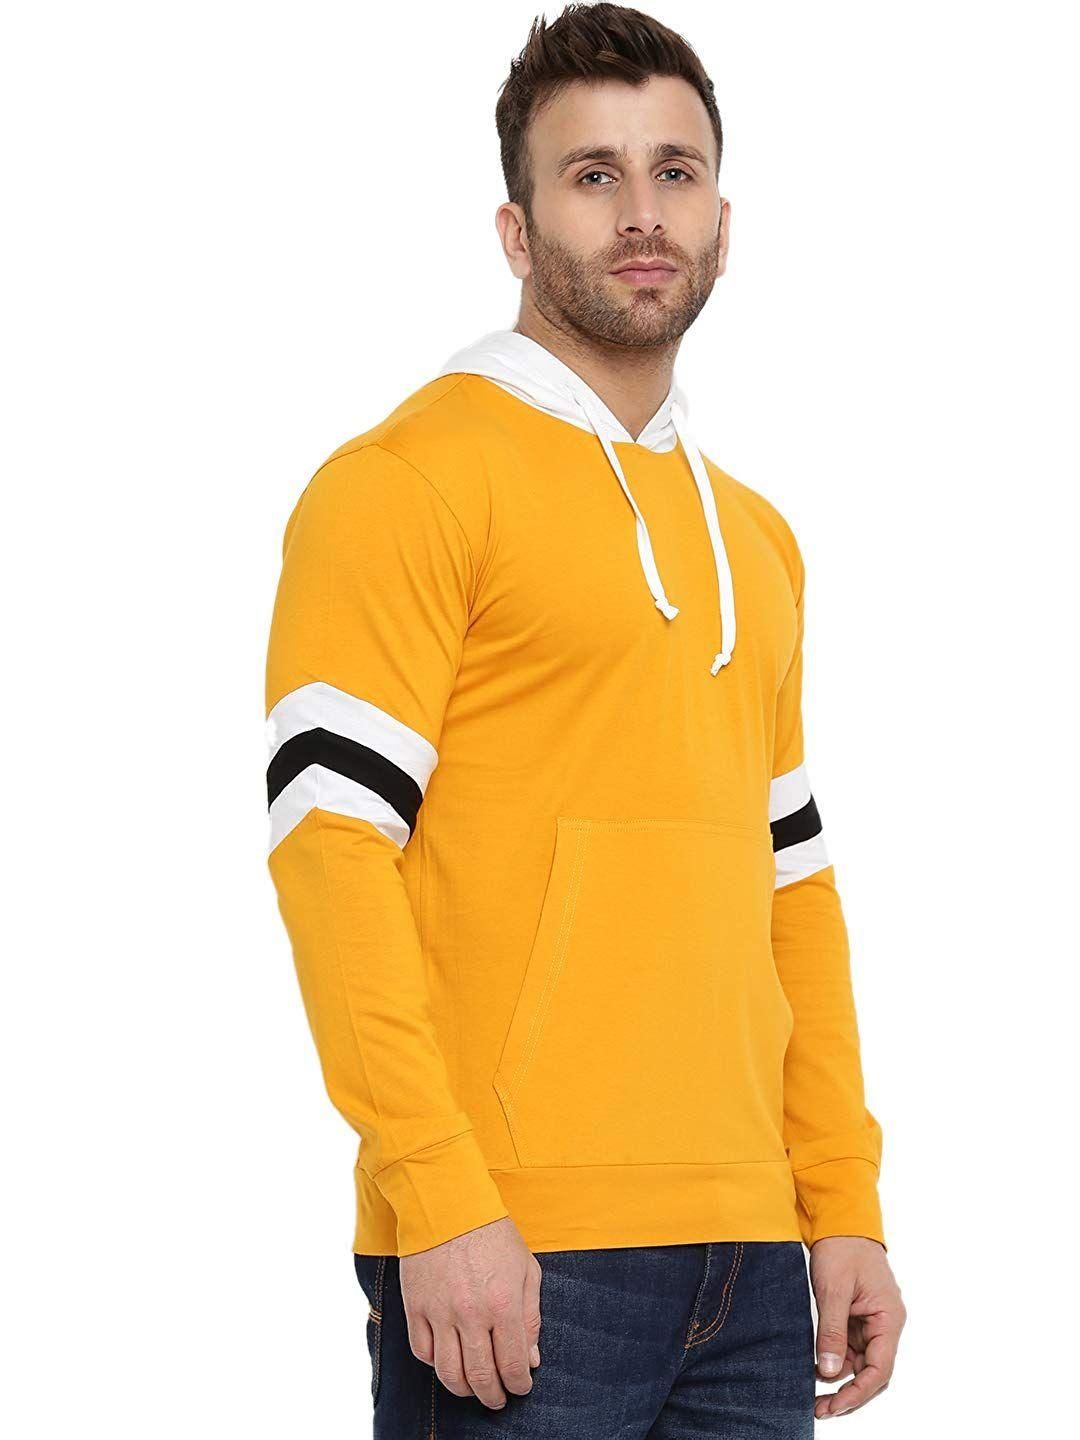 Cotton Solid Full Sleeves Hooded T-Shirt